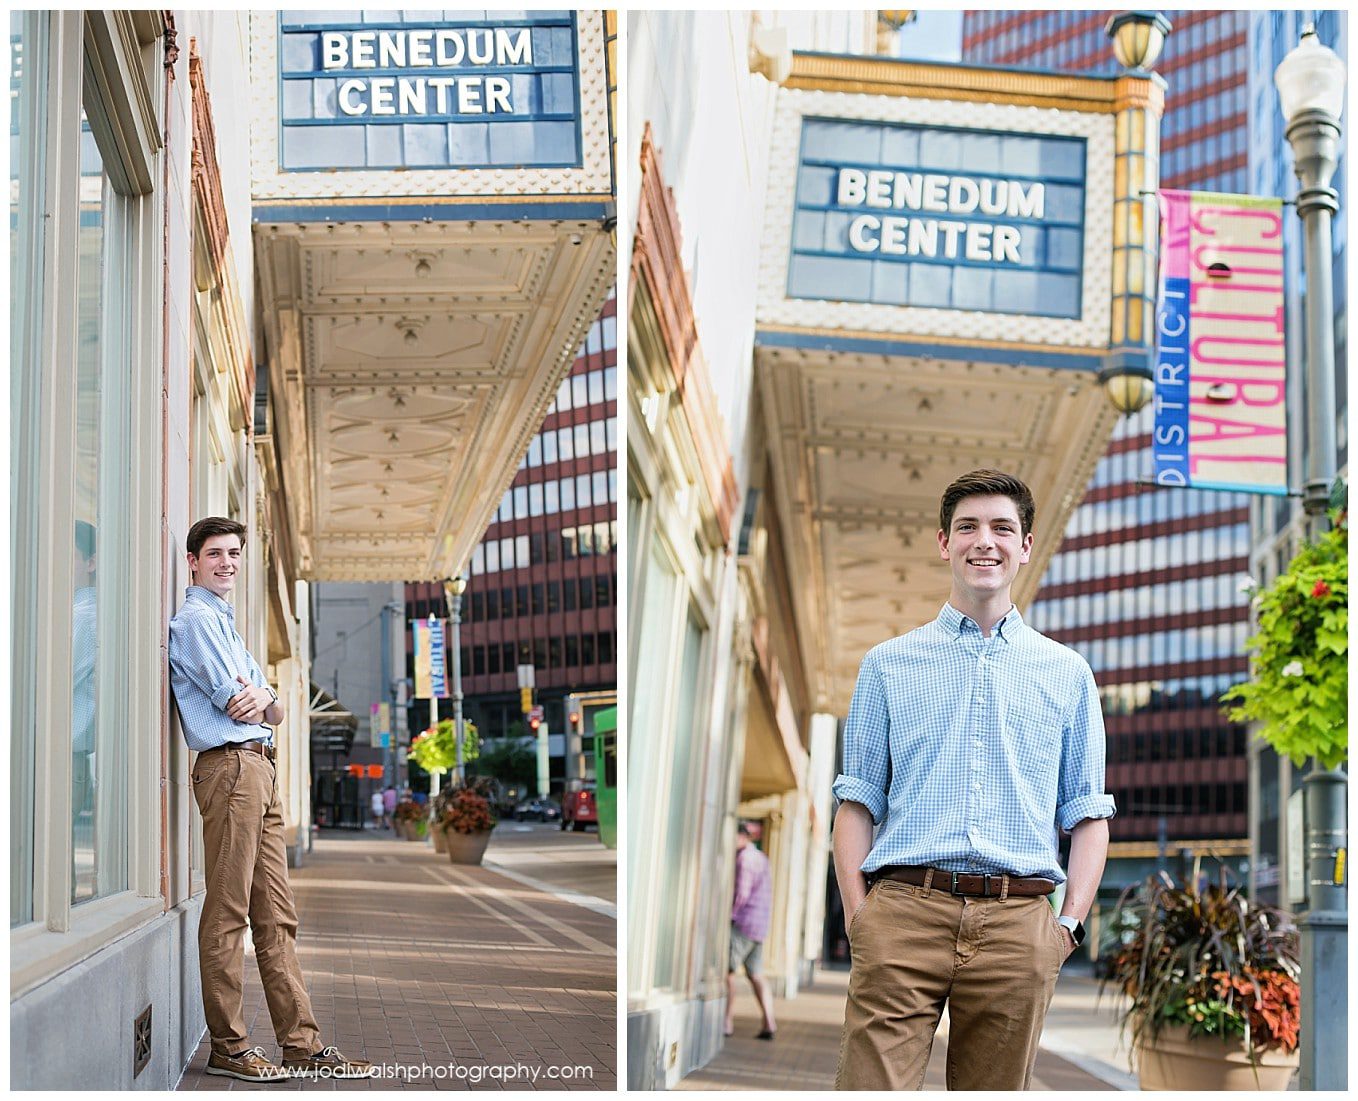 image of a senior guy standing on the sidewalk in front of the Benedum Center